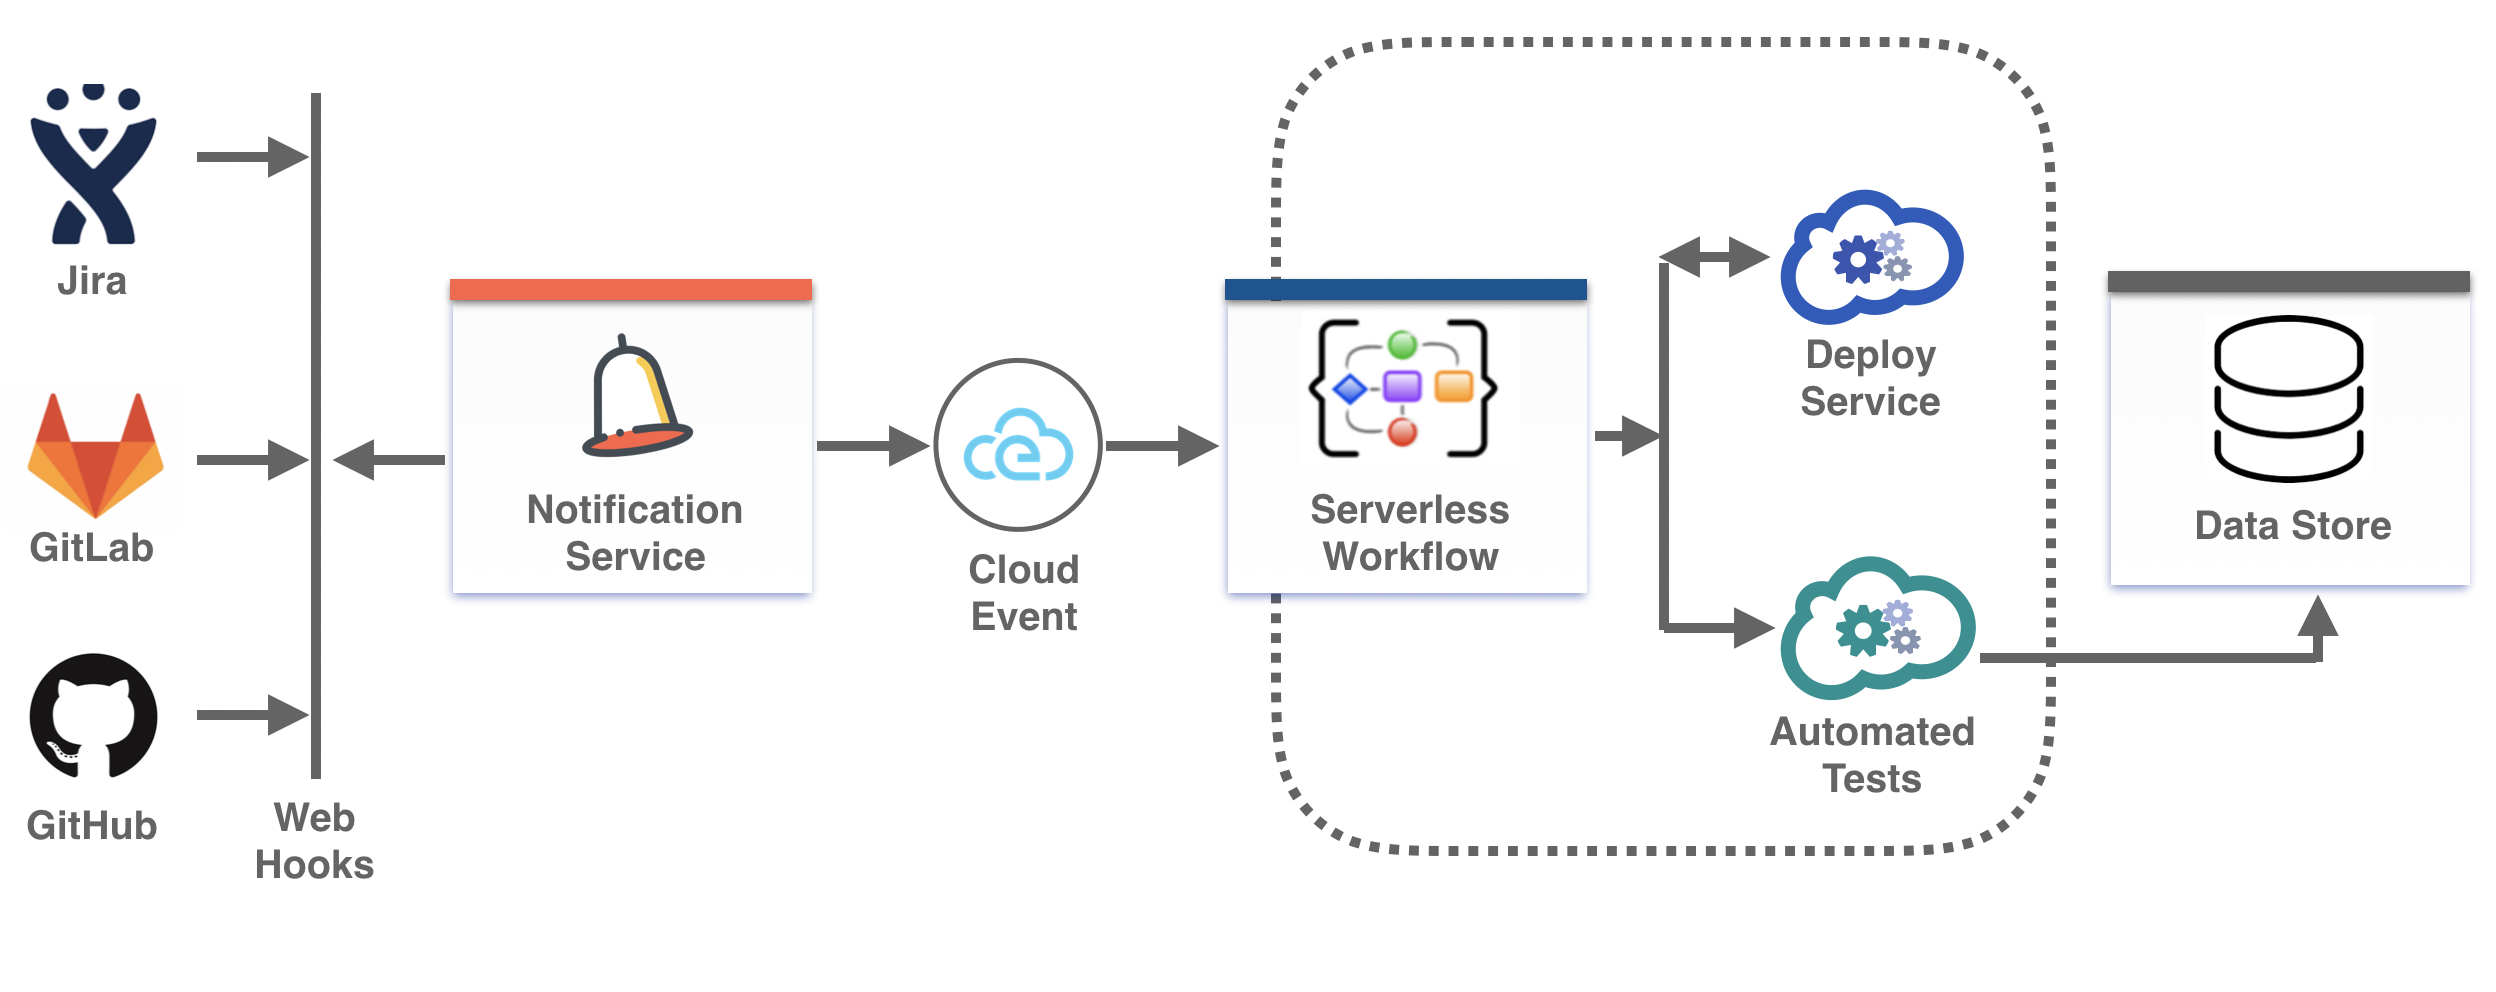 Image of Serverless Workflow orchestration for CI/CD